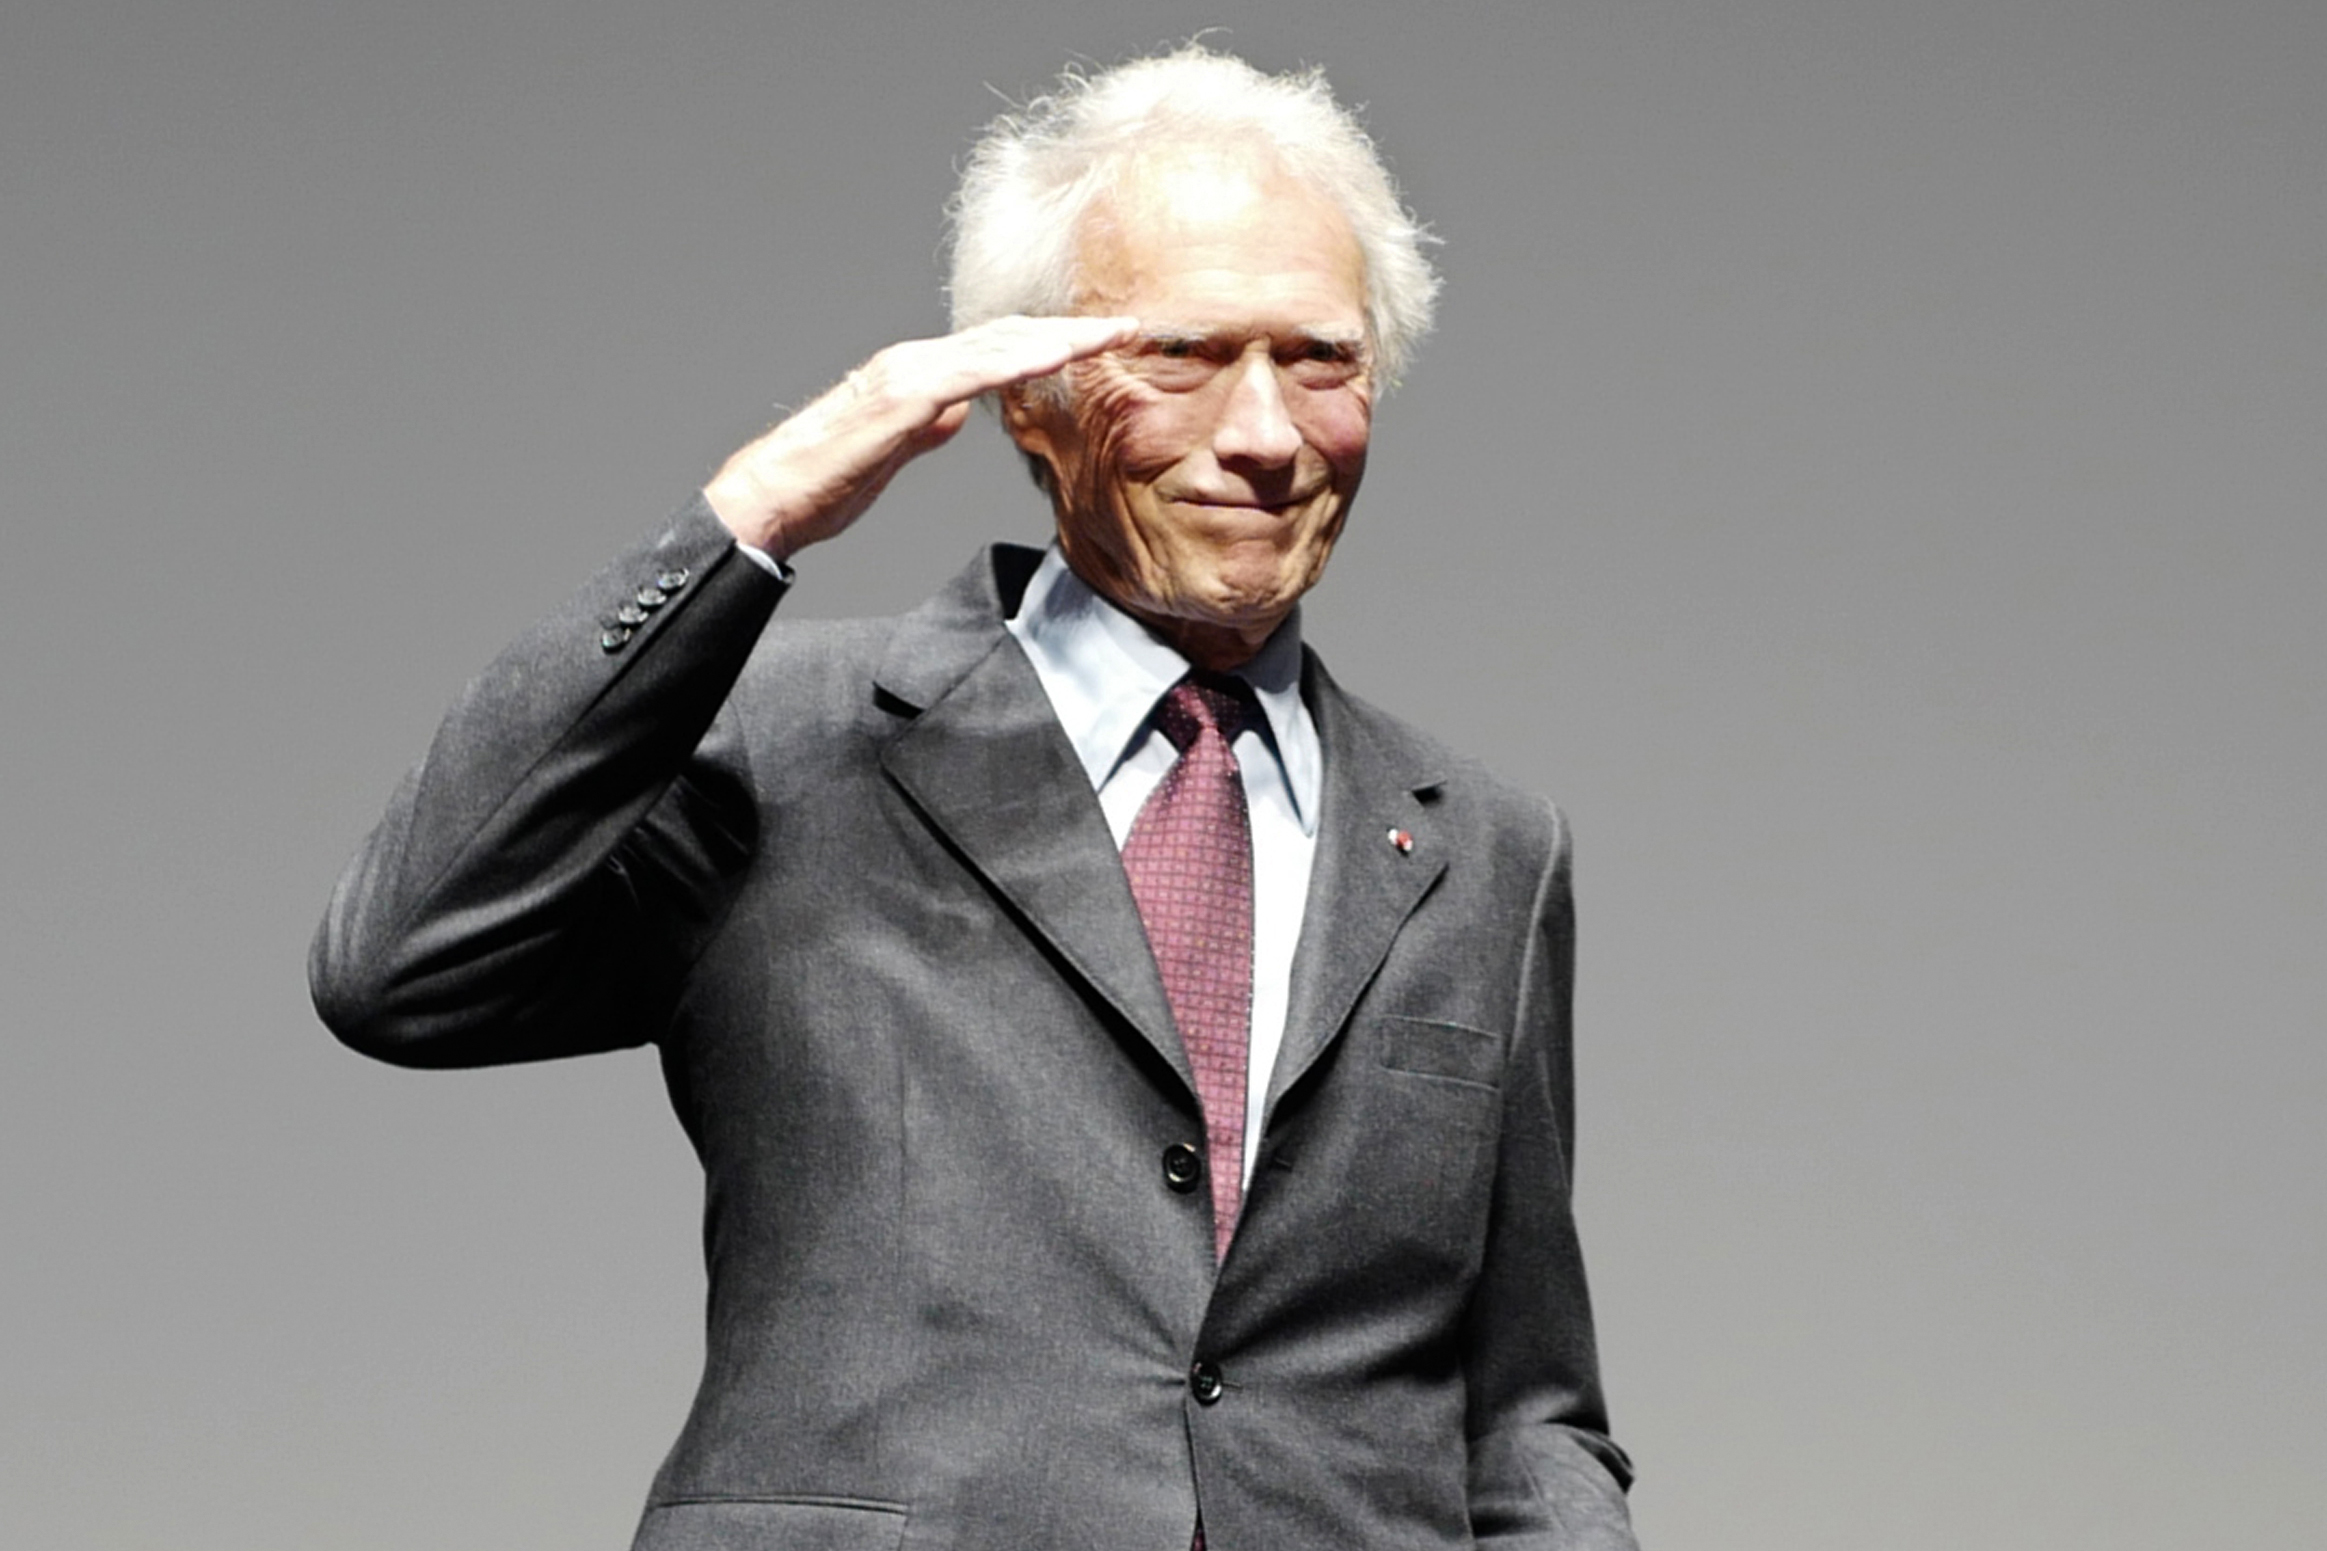 Clint Eastwood during the 70th edition of the Cannes Film Festival in Cannes, France on May 20, 2017 | Source: Getty Images